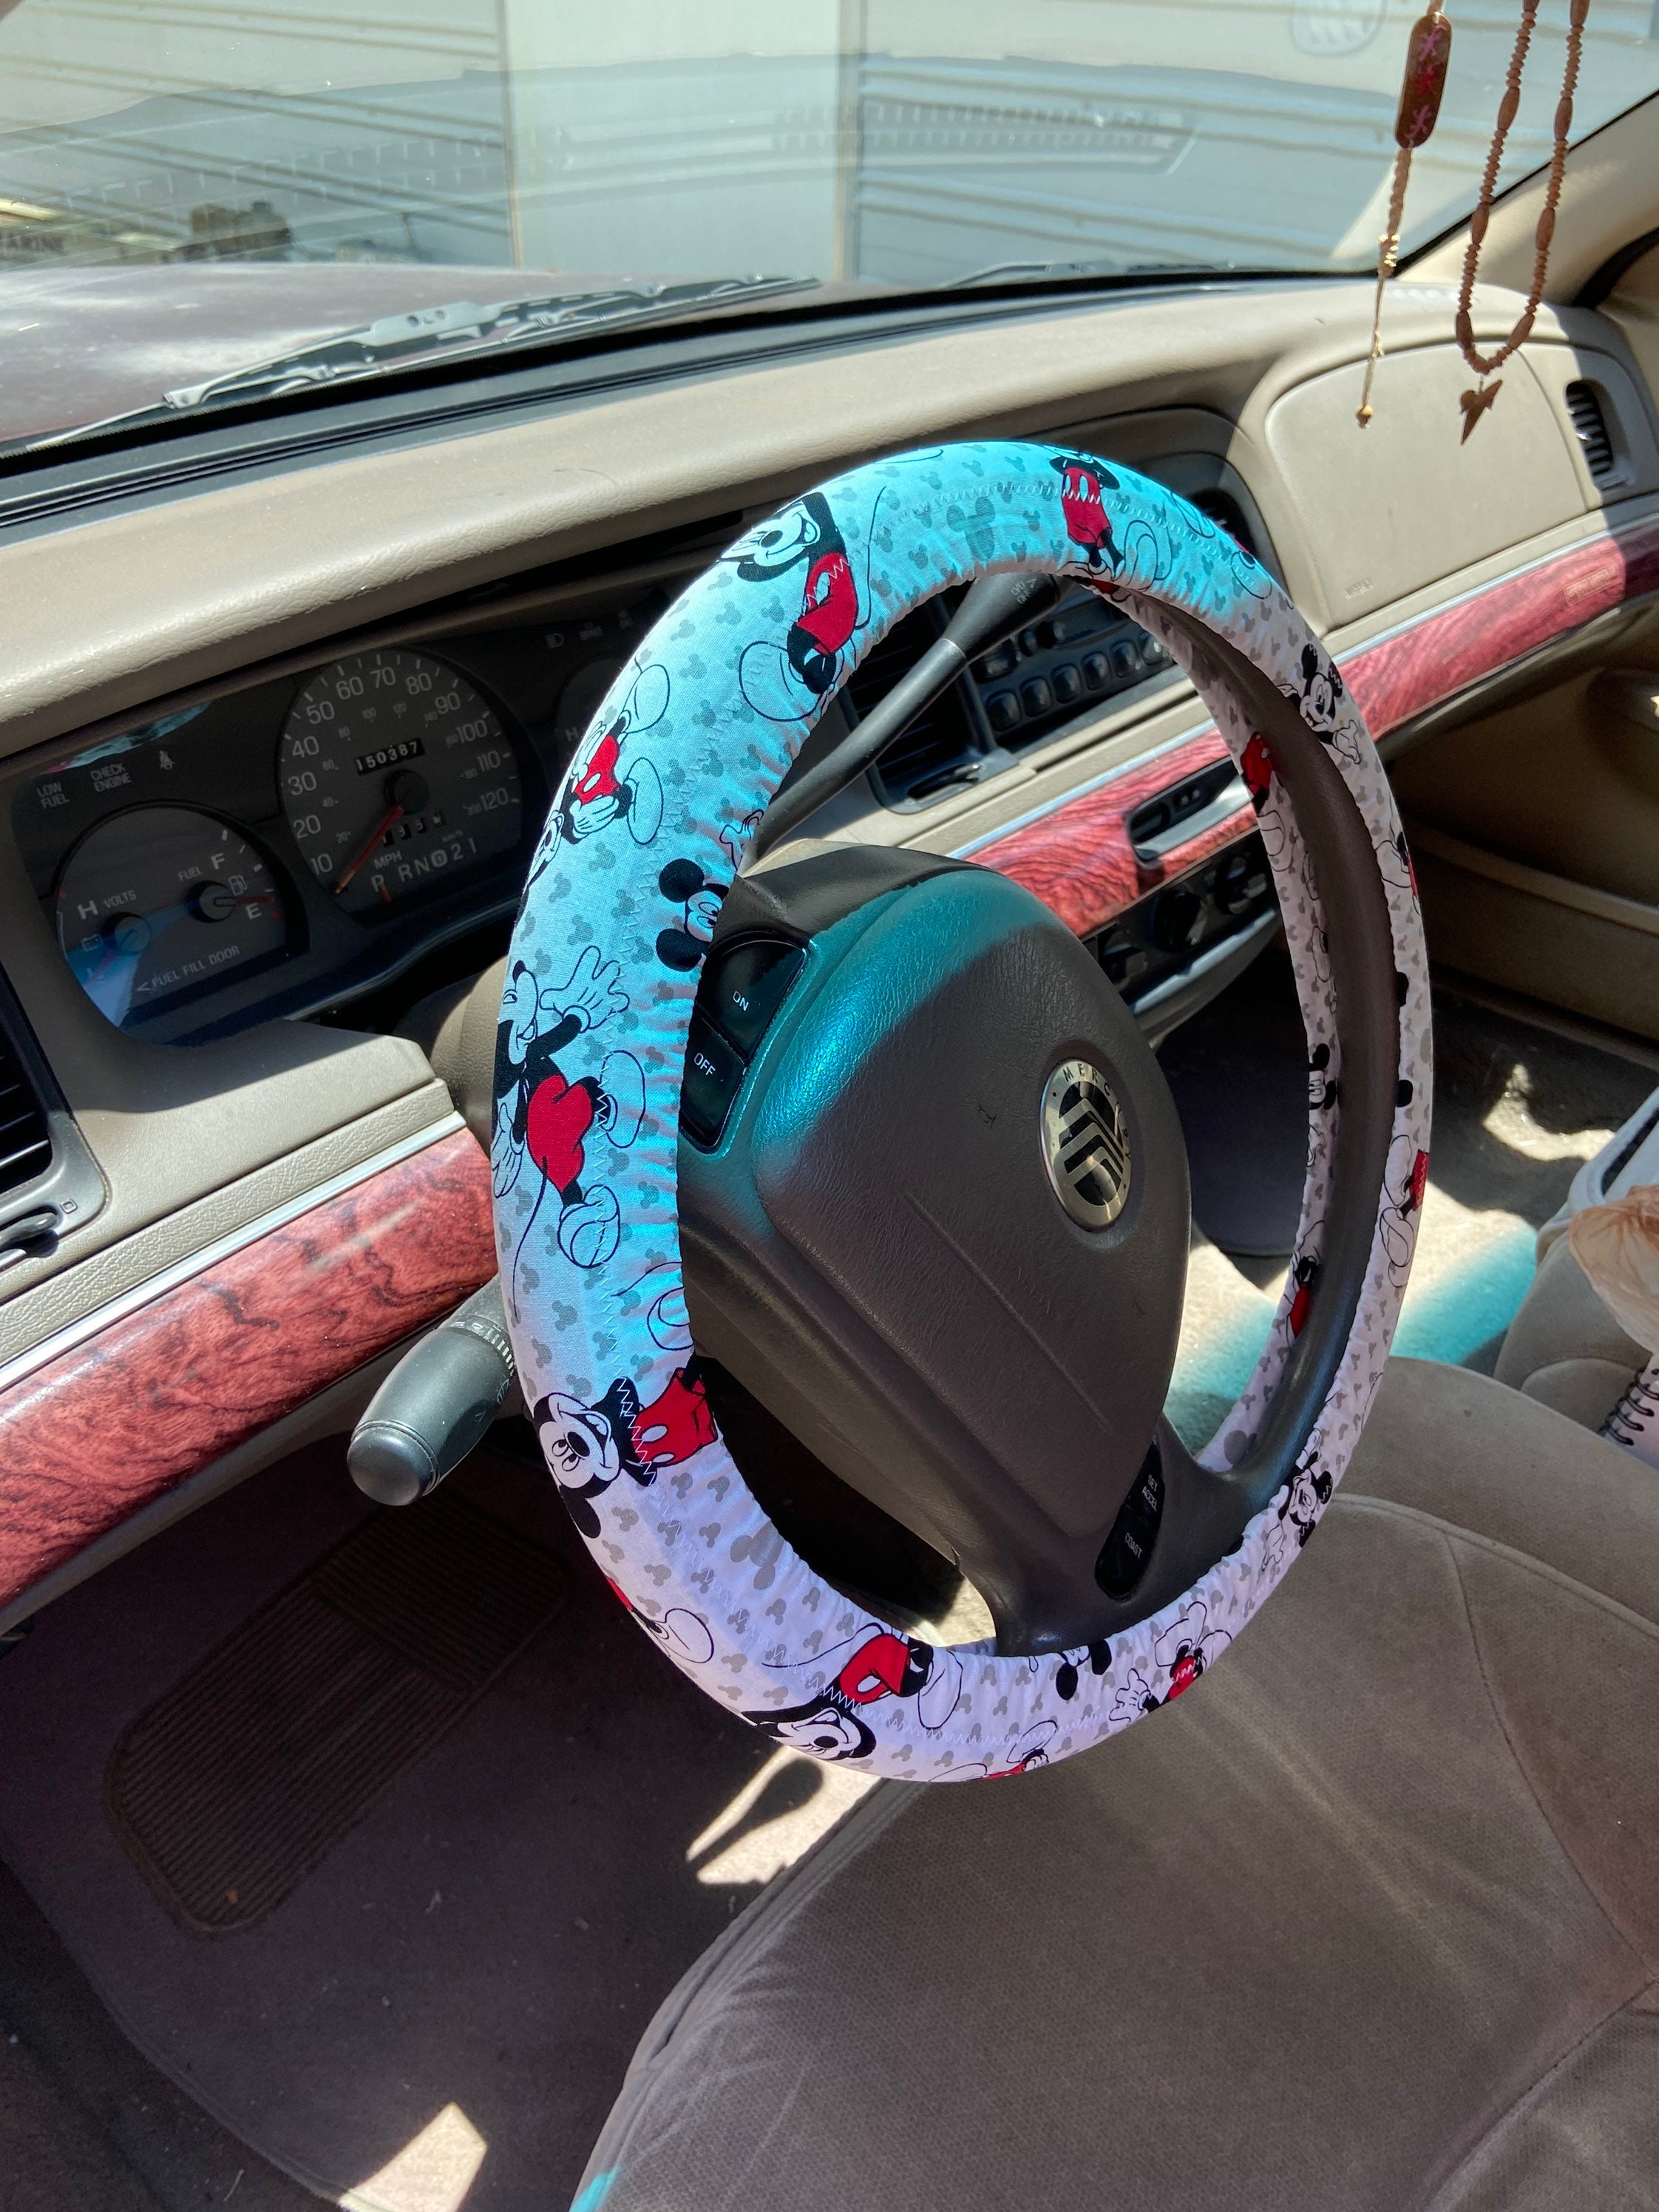 Mickey Mouse Cute Car Accessories Steering Wheel Cover Interior